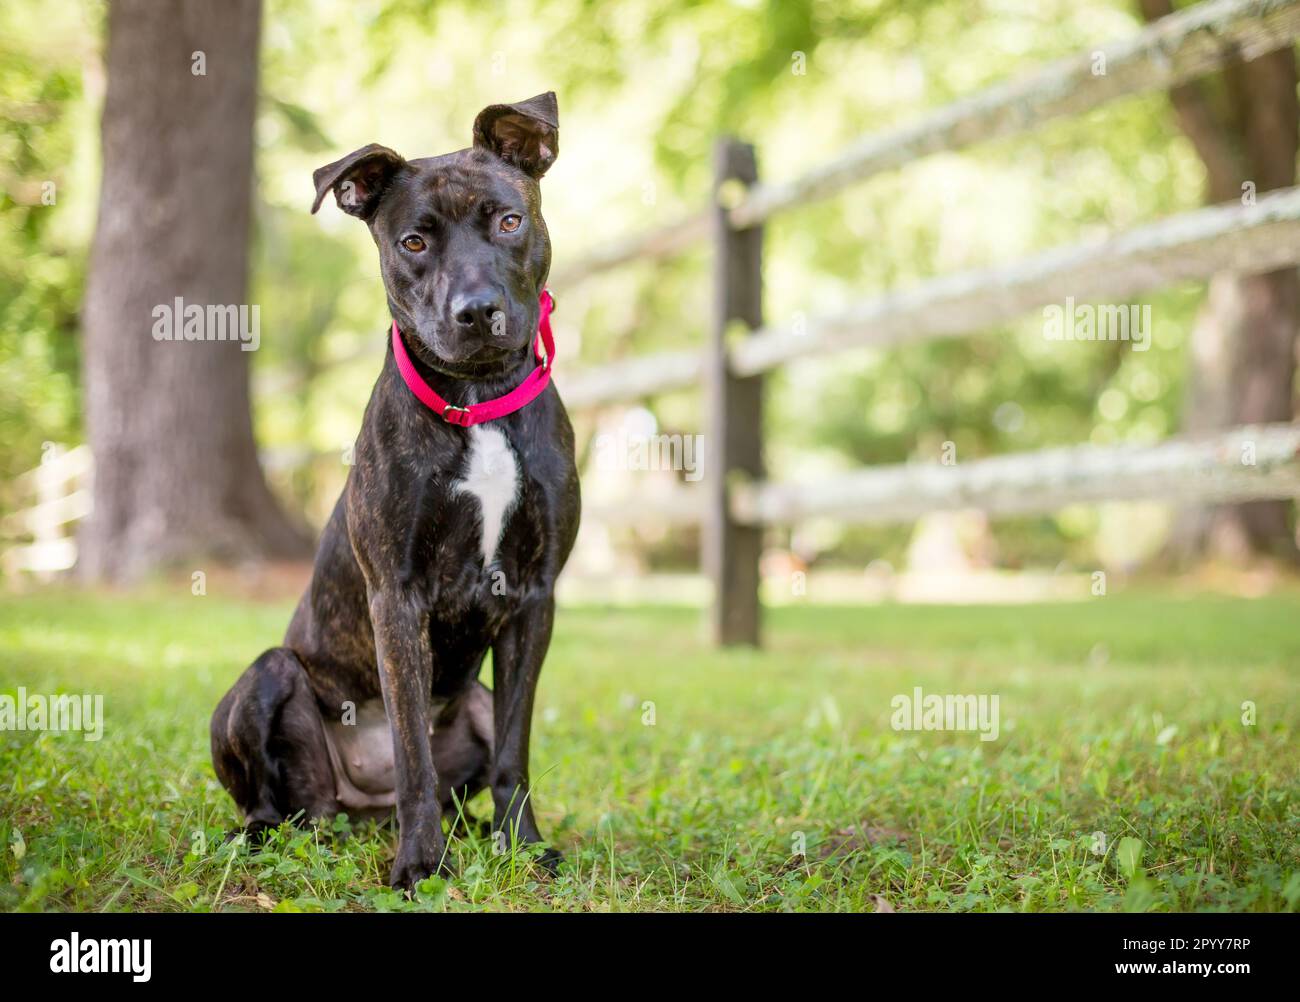 A brindle Pit Bull Terrier mixed breed dog wearing a collar and looking at the camera with a head tilt Stock Photo